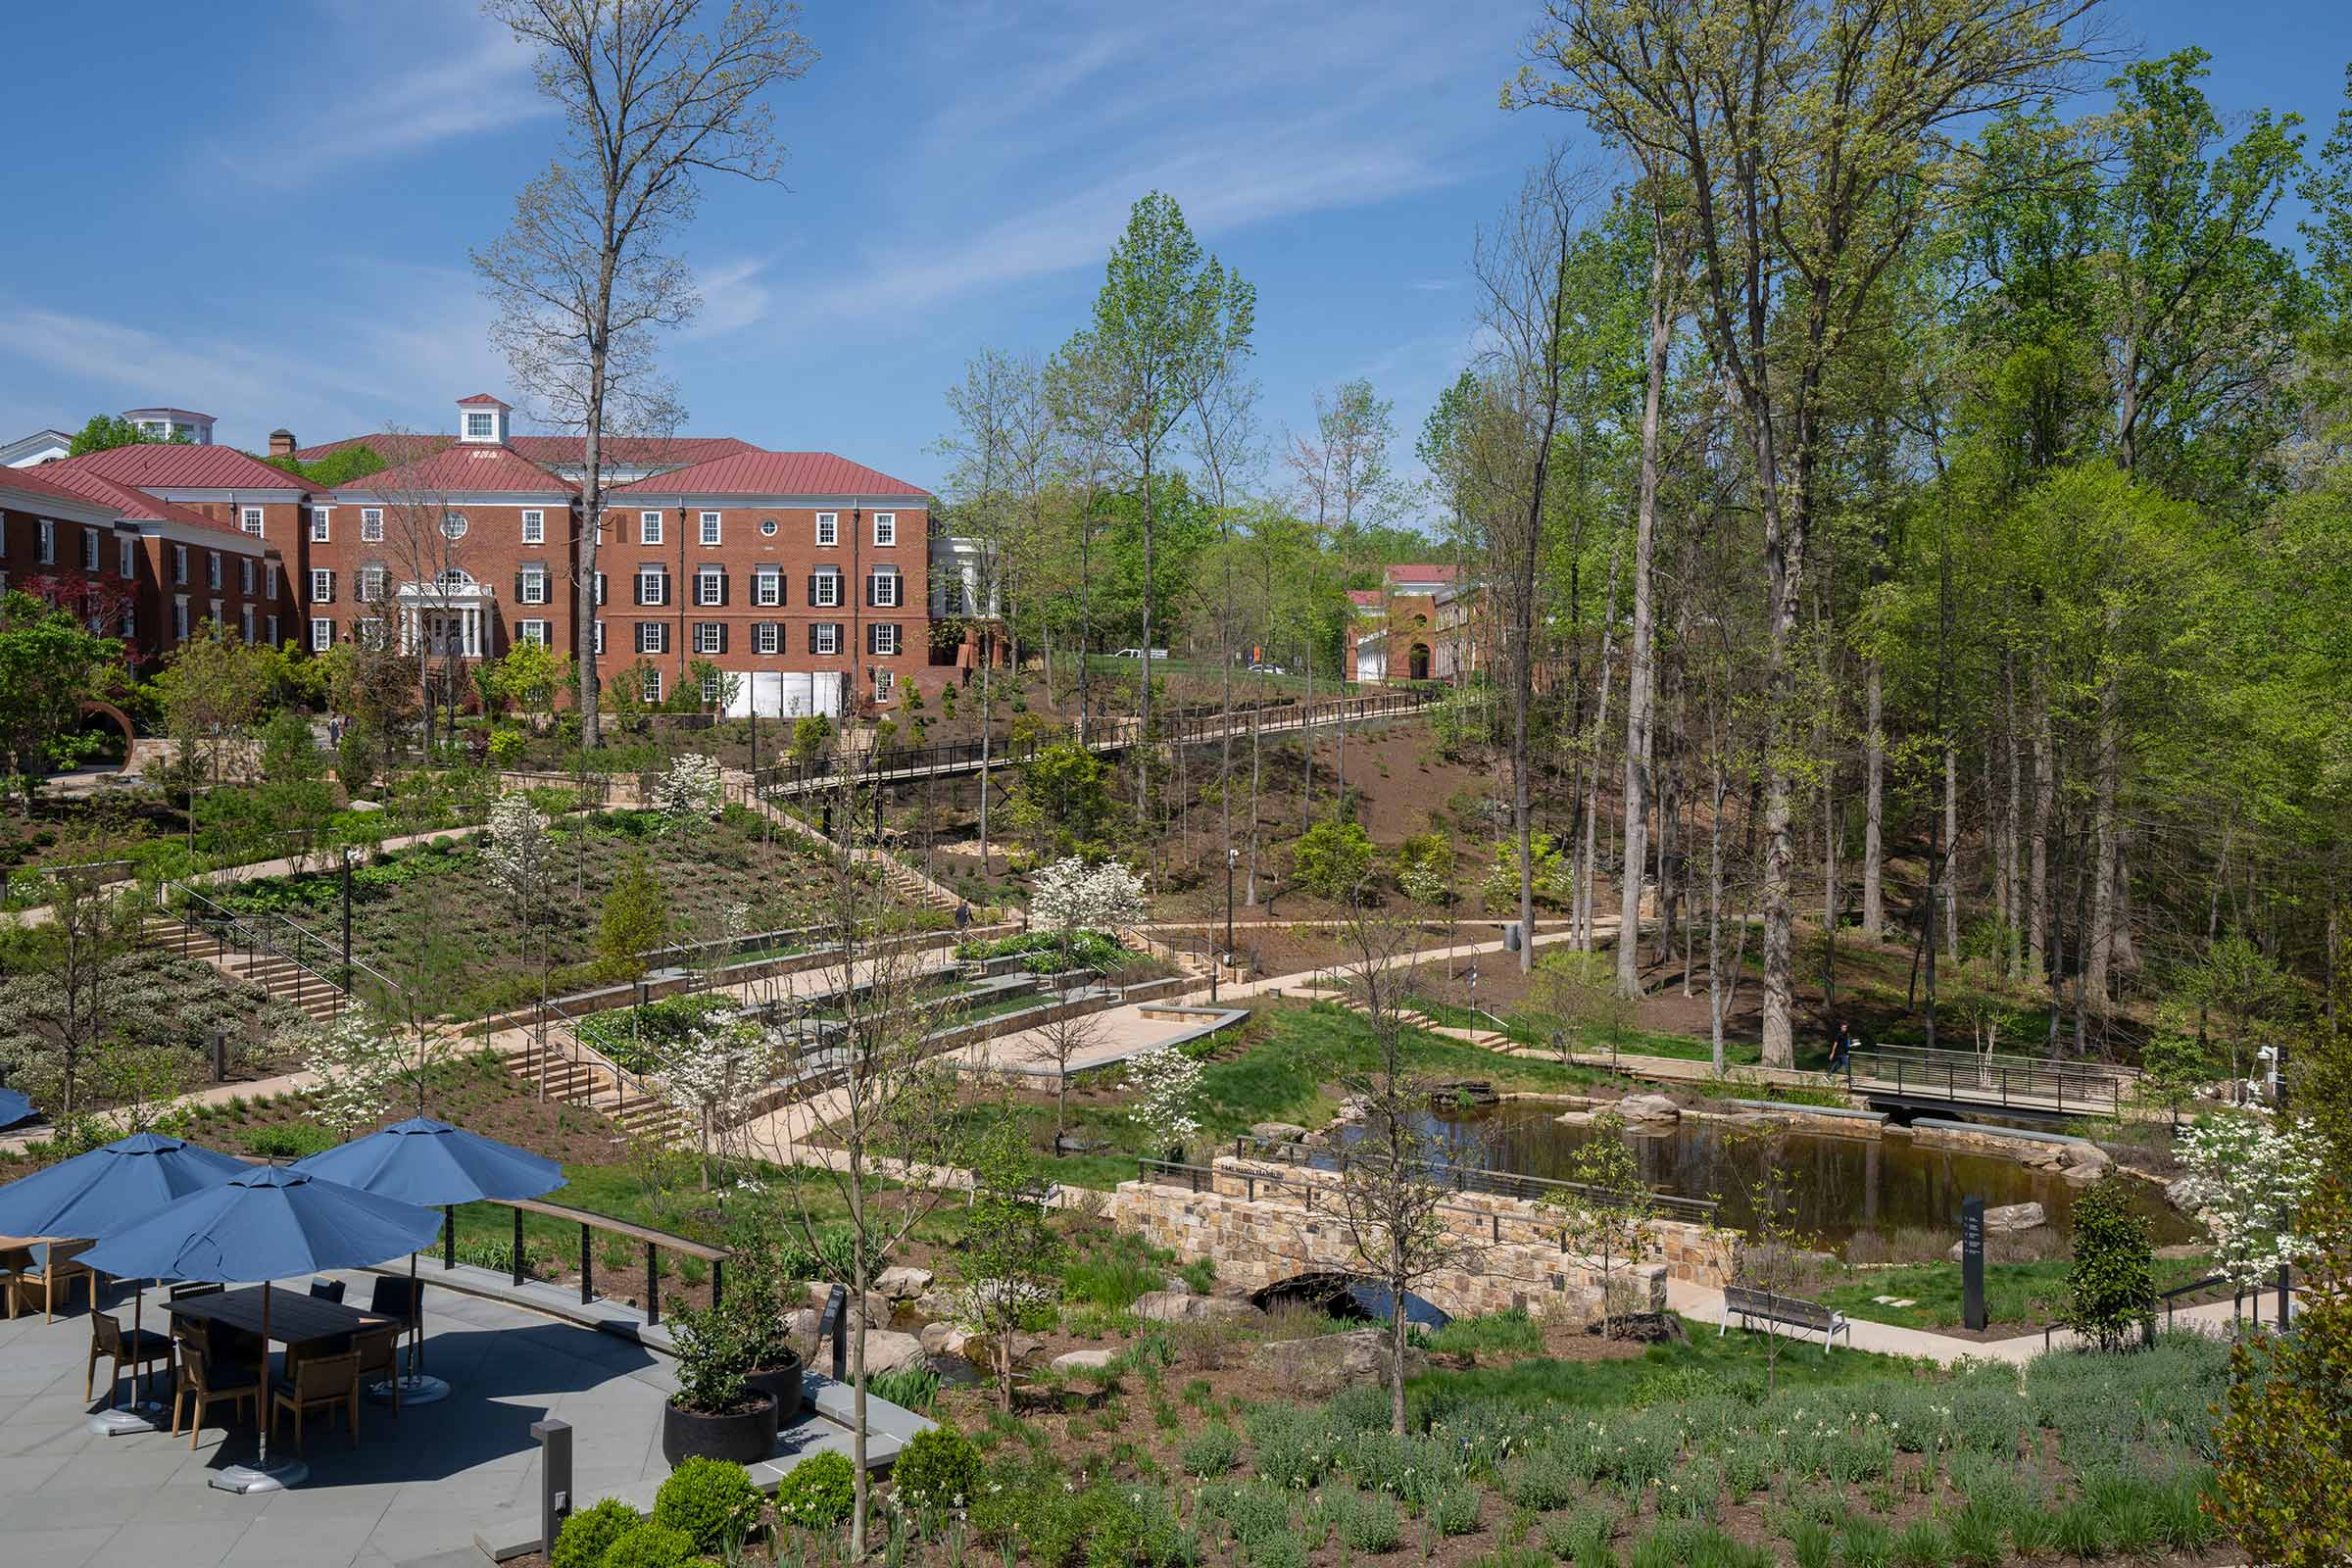 An overview shot of the new arboretum